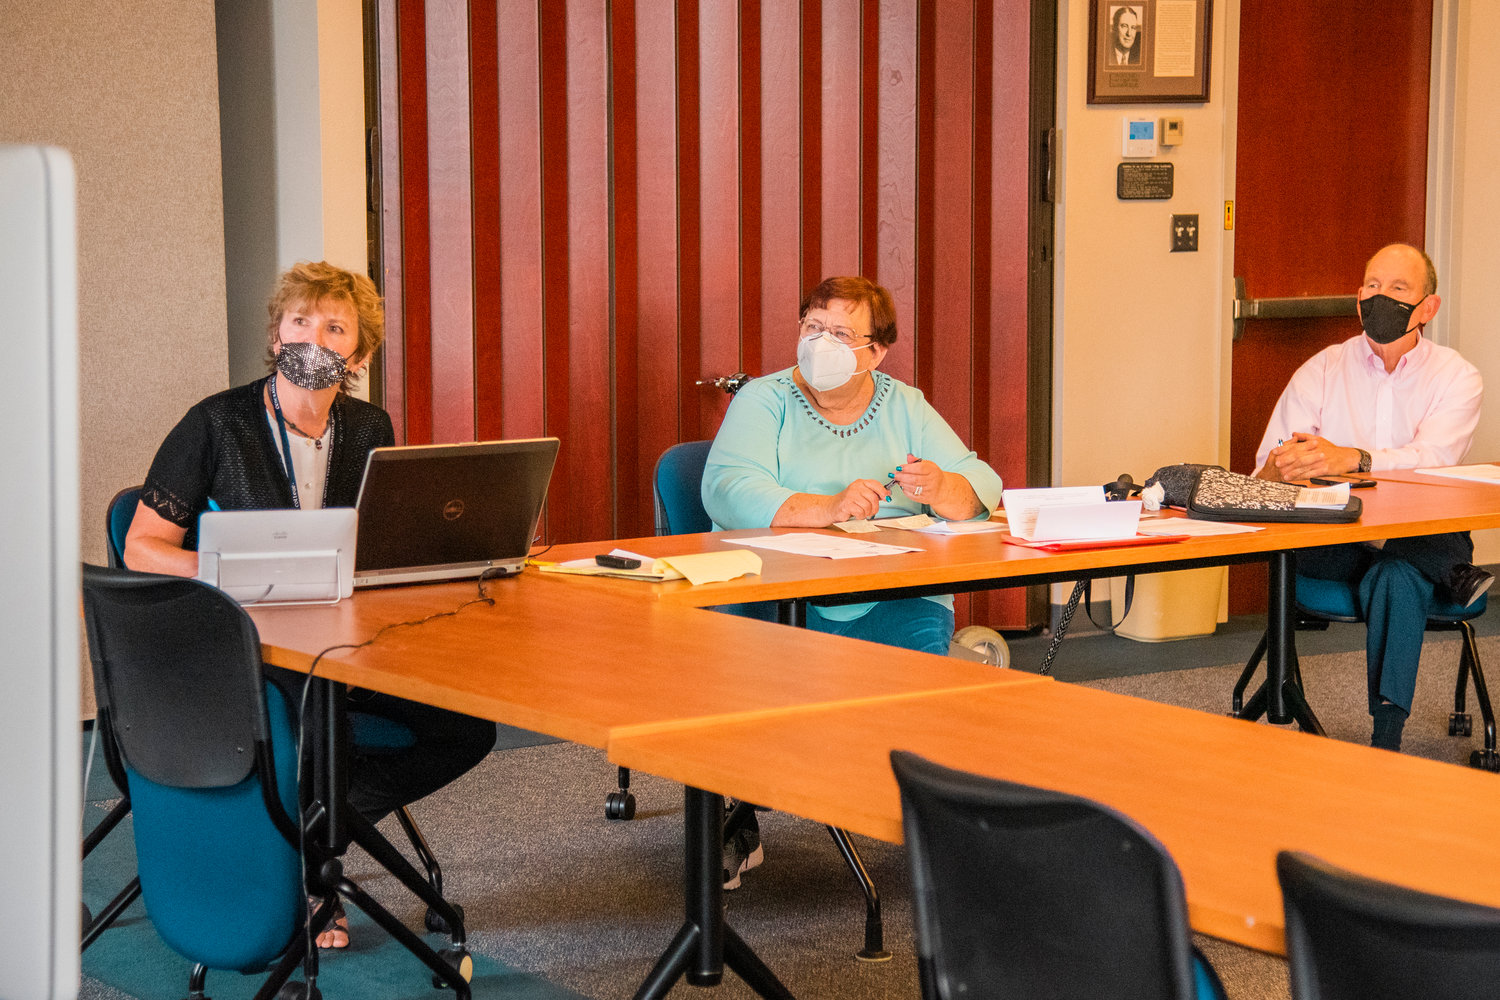 Board of Trustees Chair Doris Wood-Brumsickle, center, talks during a meeting in the Hanson Administration Building at Centralia College on Thursday.